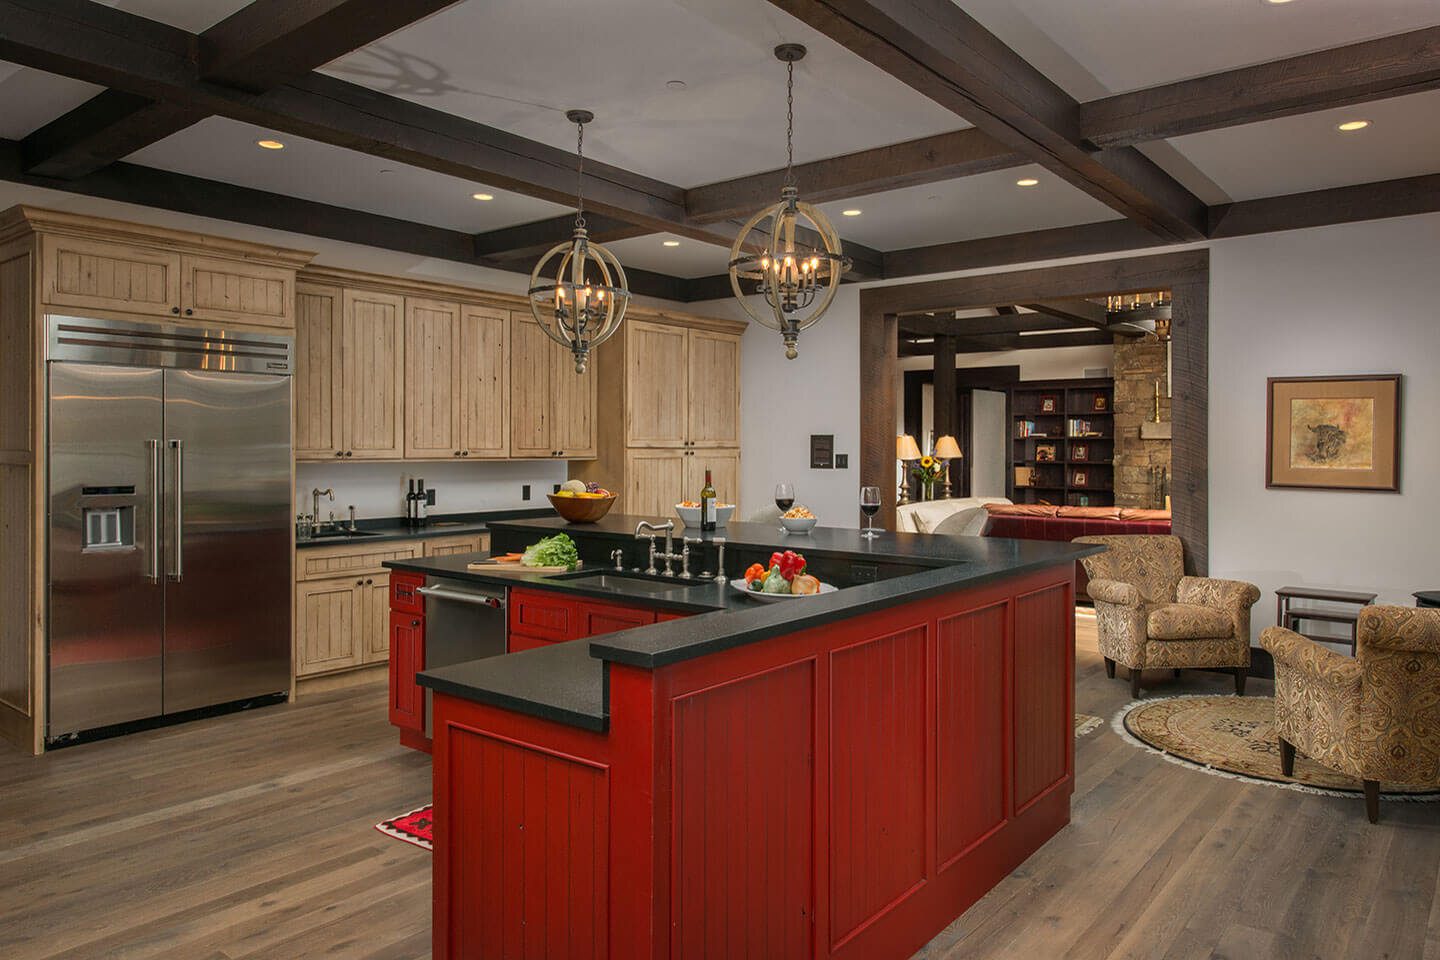 Red center counter in kitchen with spherical chandeliers